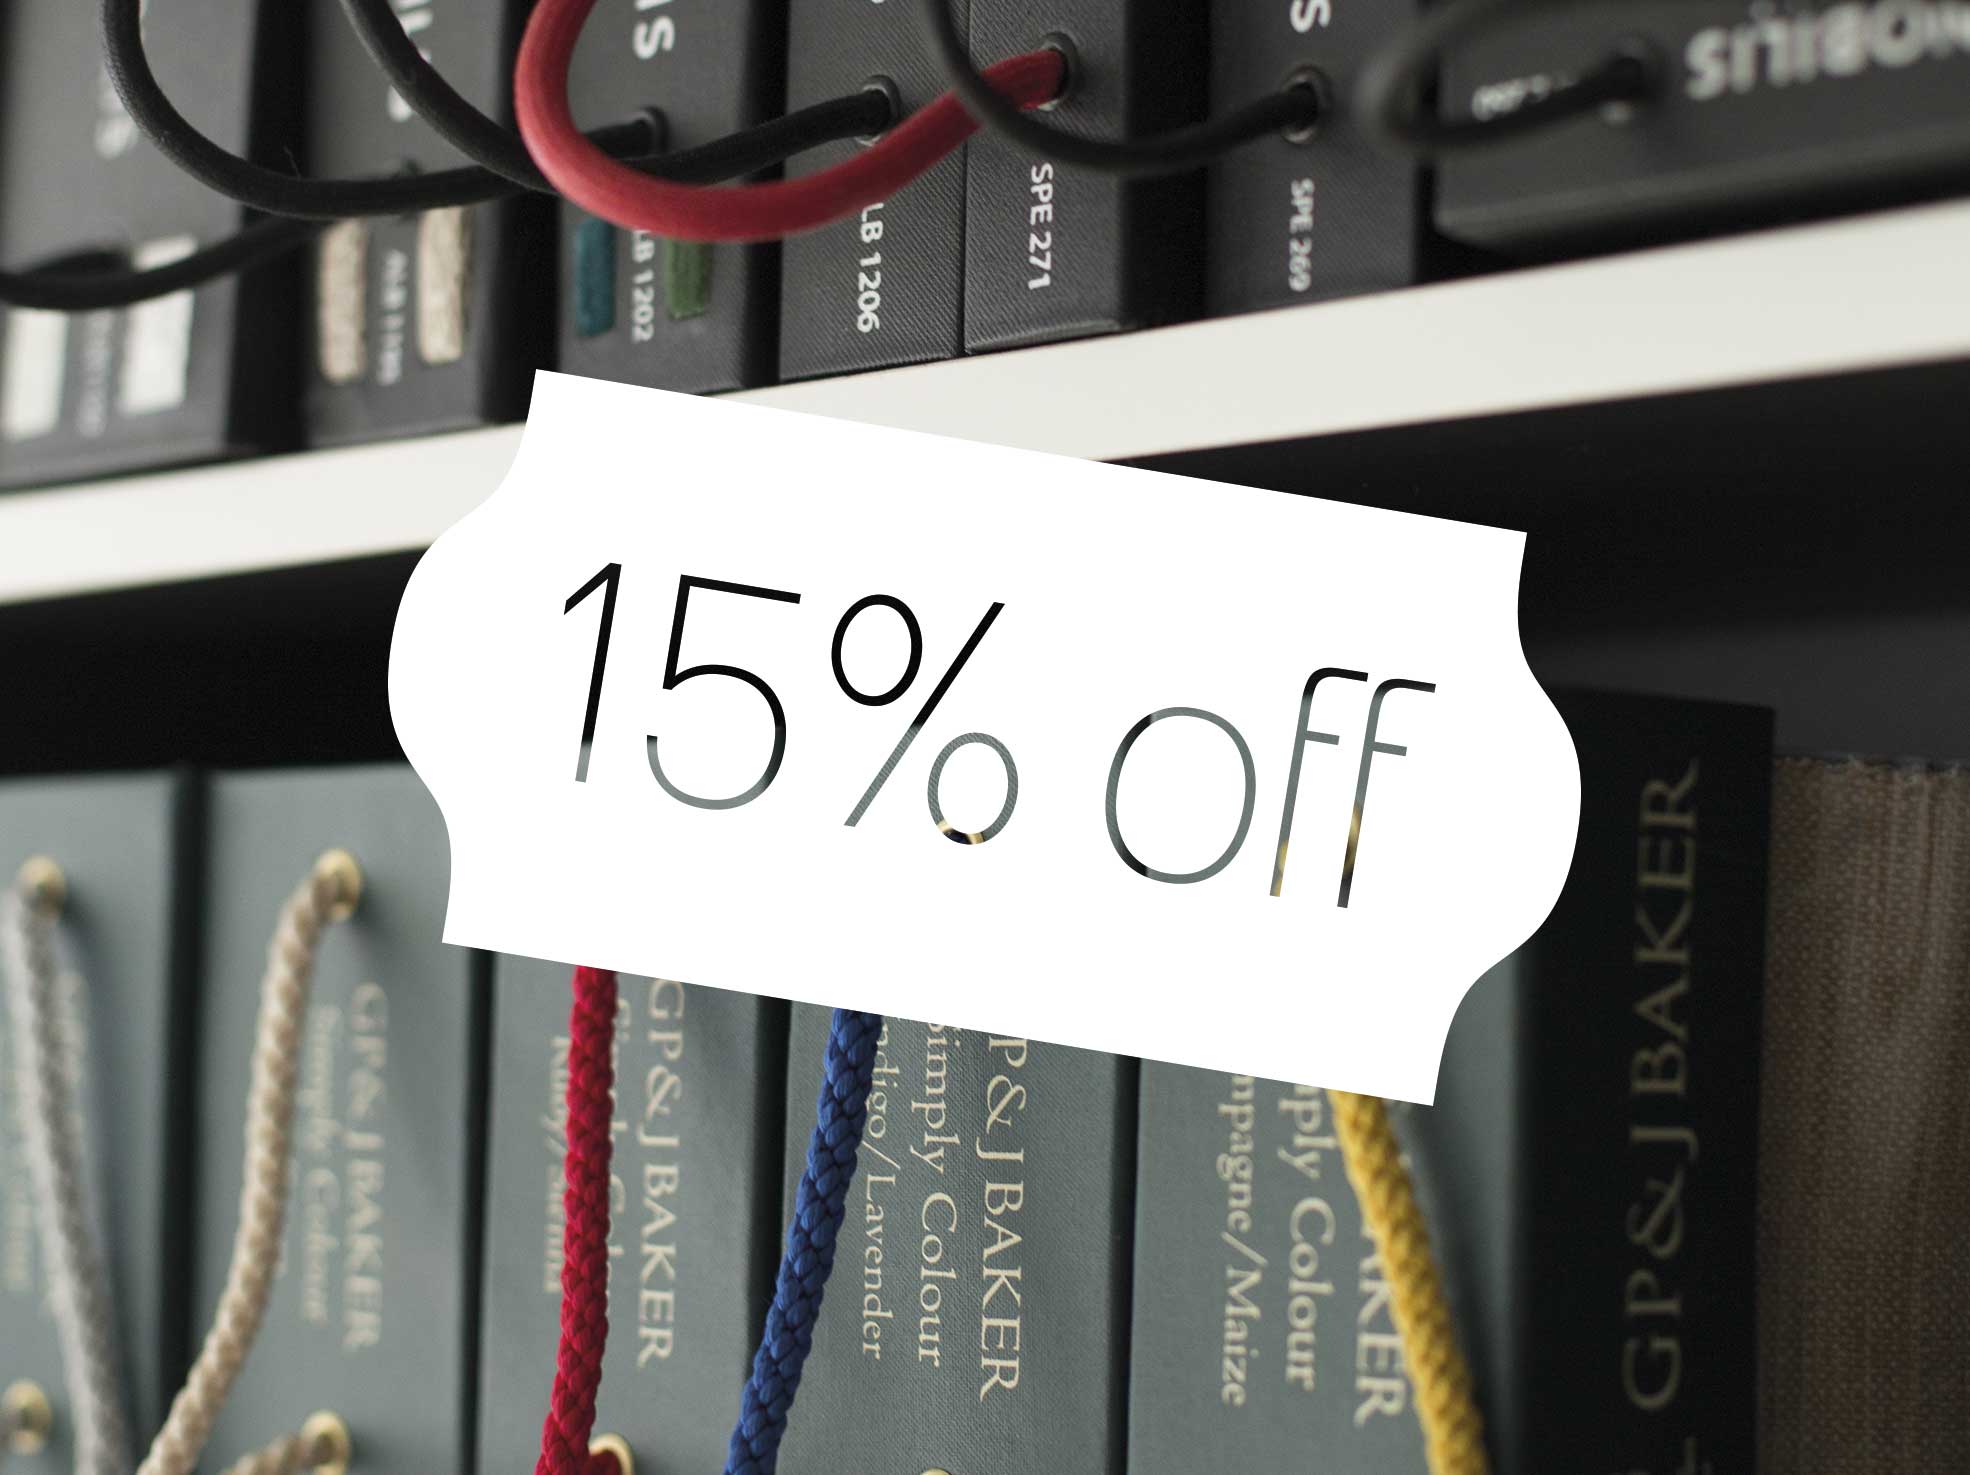 This summer, there's 15% off in our showroom